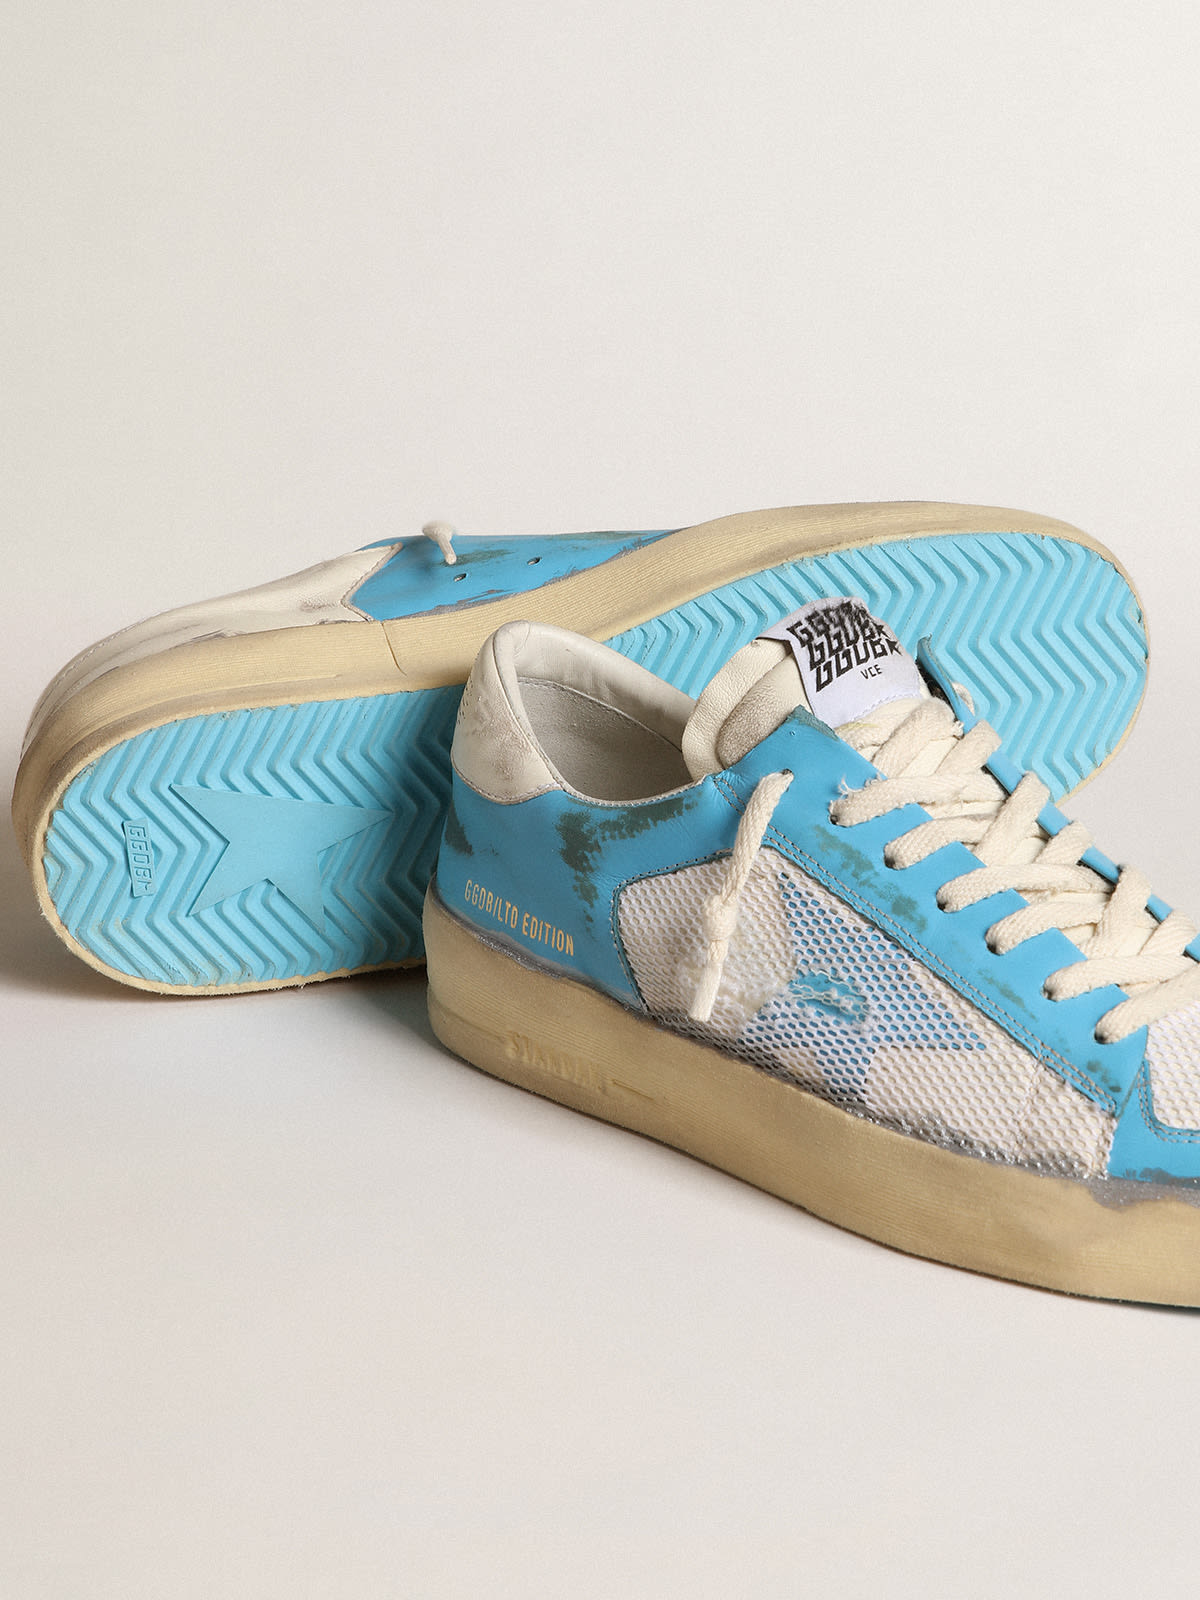 Golden Goose - Men's Stardan LAB in light blue nappa leather and white mesh in 